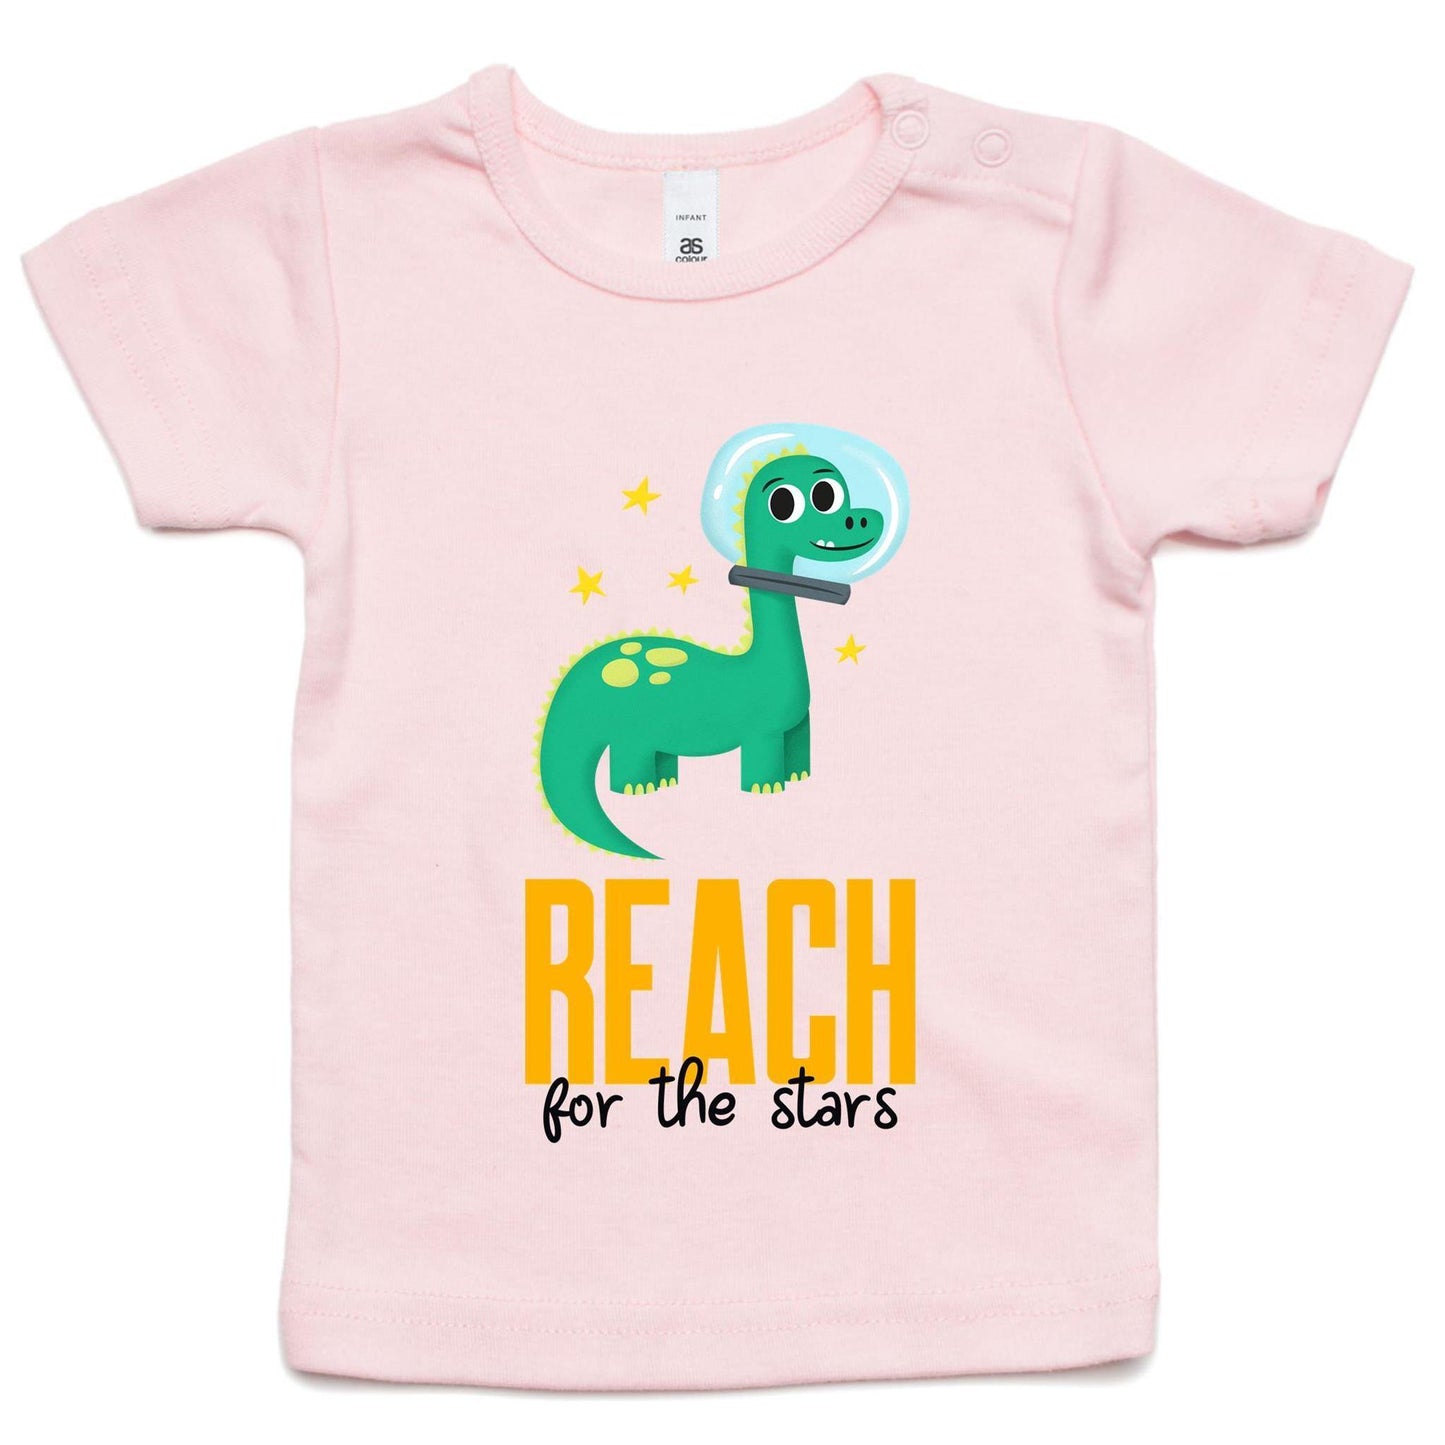 Reach For The Stars - Baby T-shirt Pink Baby T-shirt animal kids Space